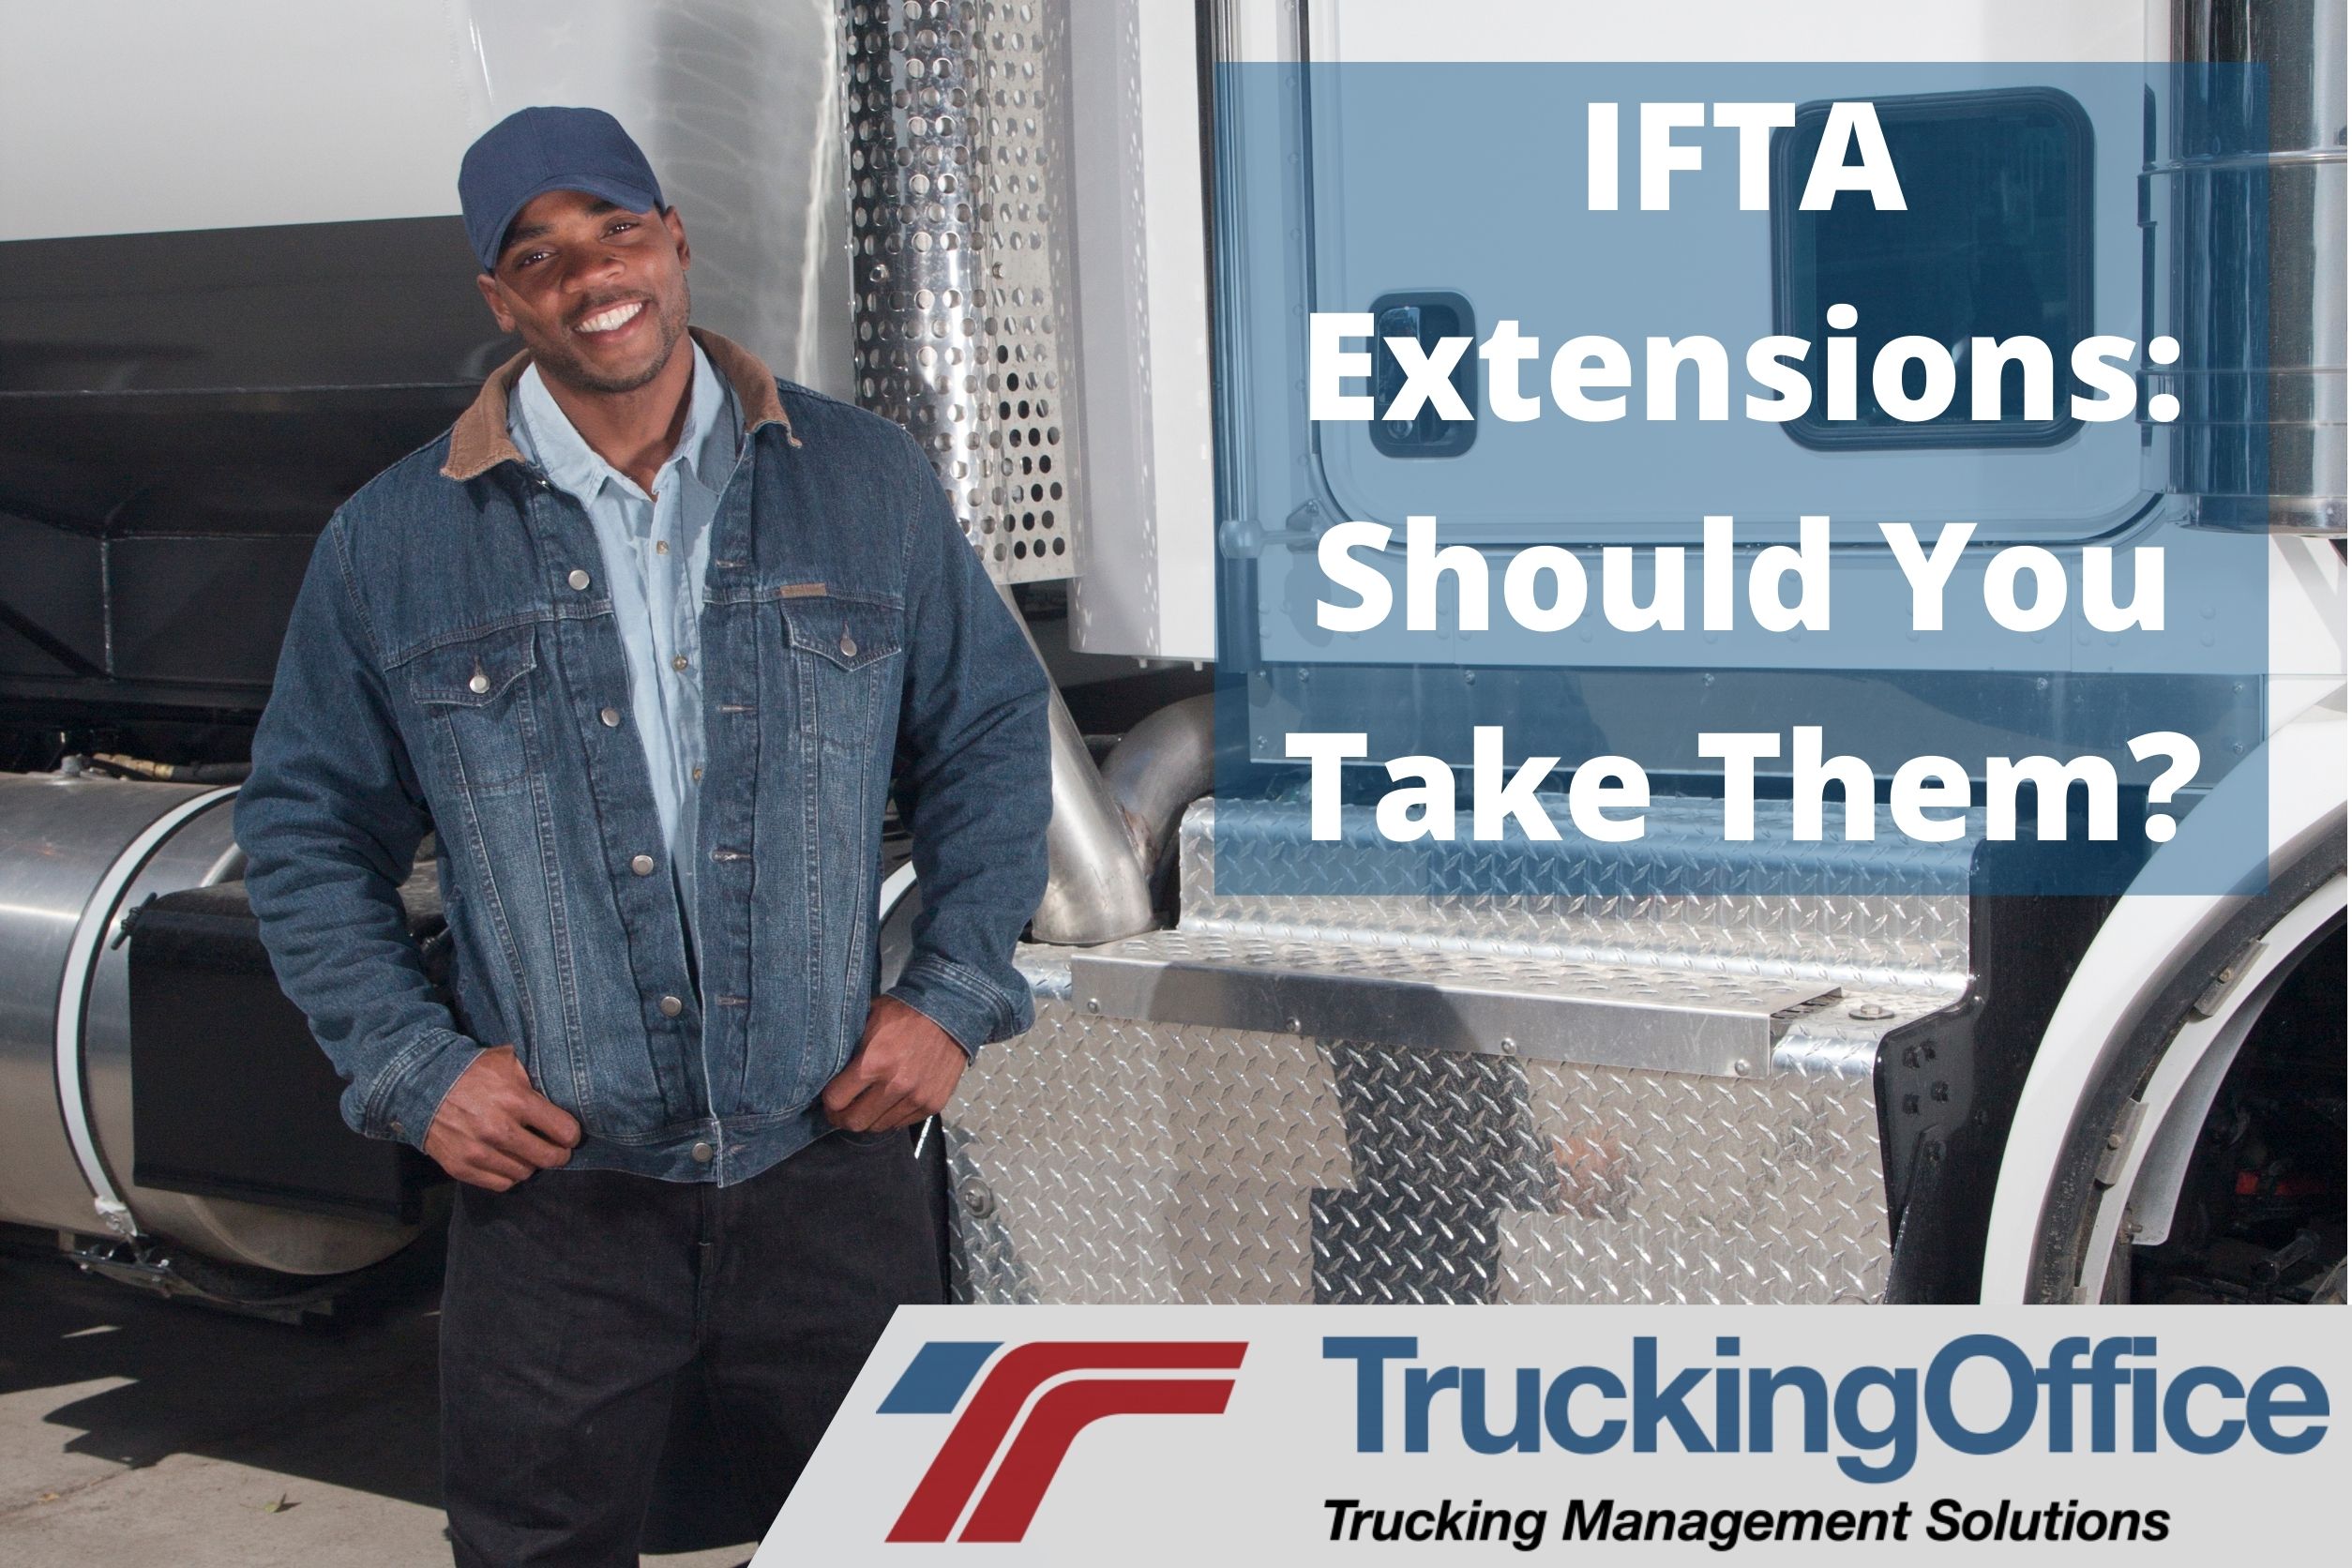 IFTA Extensions: Should you take it?